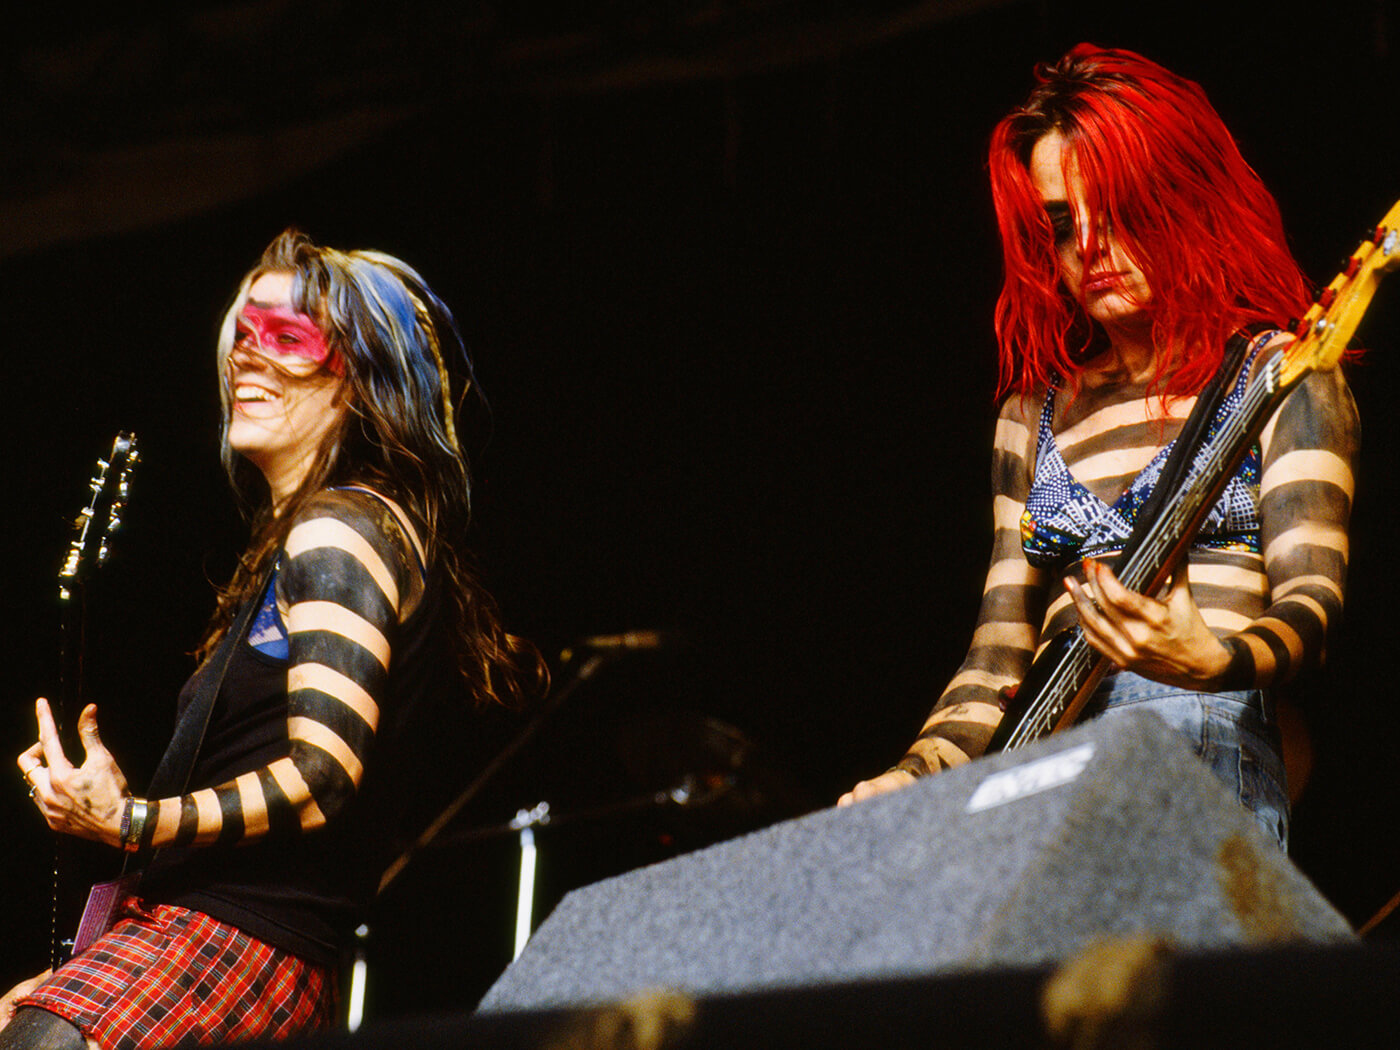 Donita Sparks and Jennifer Finch of L7